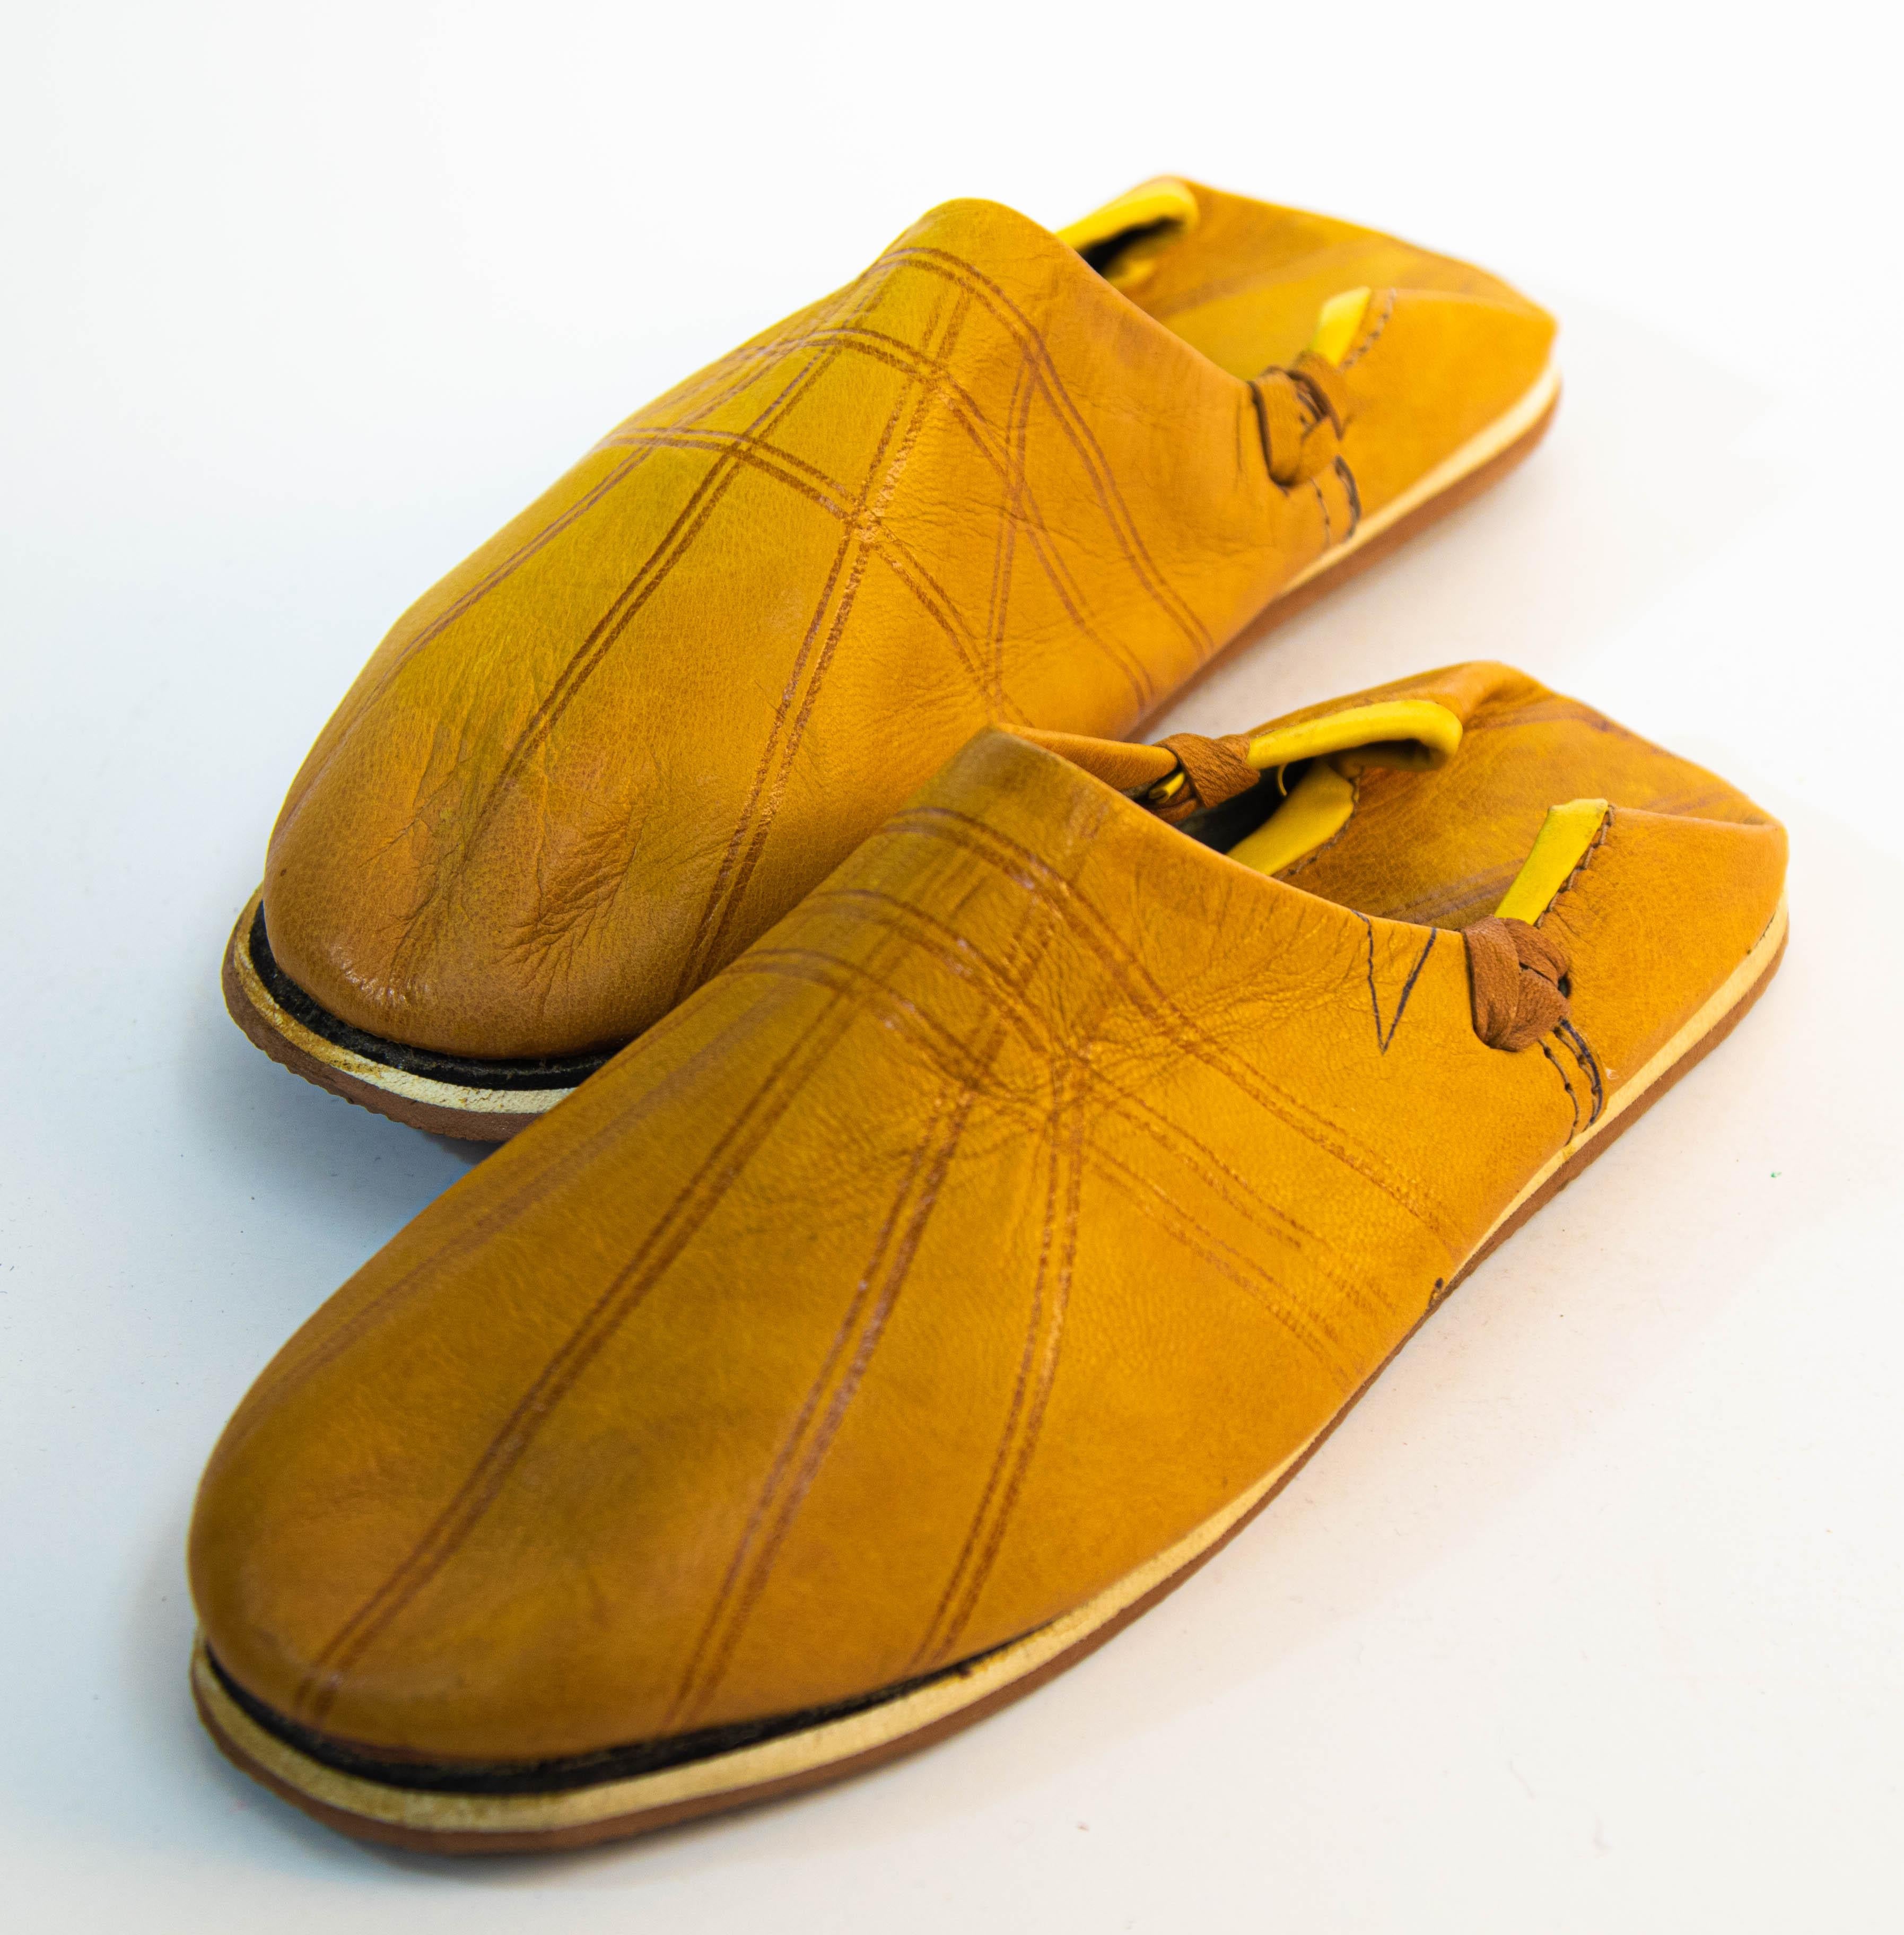 Moroccan leather ethnic yellow slippers are handmade.
Handcrafted in Fez Morocco.
Moroccan shoes to wear around the pool or at the beach just in time for Summer.
Measurements.
Sole is 9.5 in. x 3.5 in wide.
Moroccan babouches, organic leather